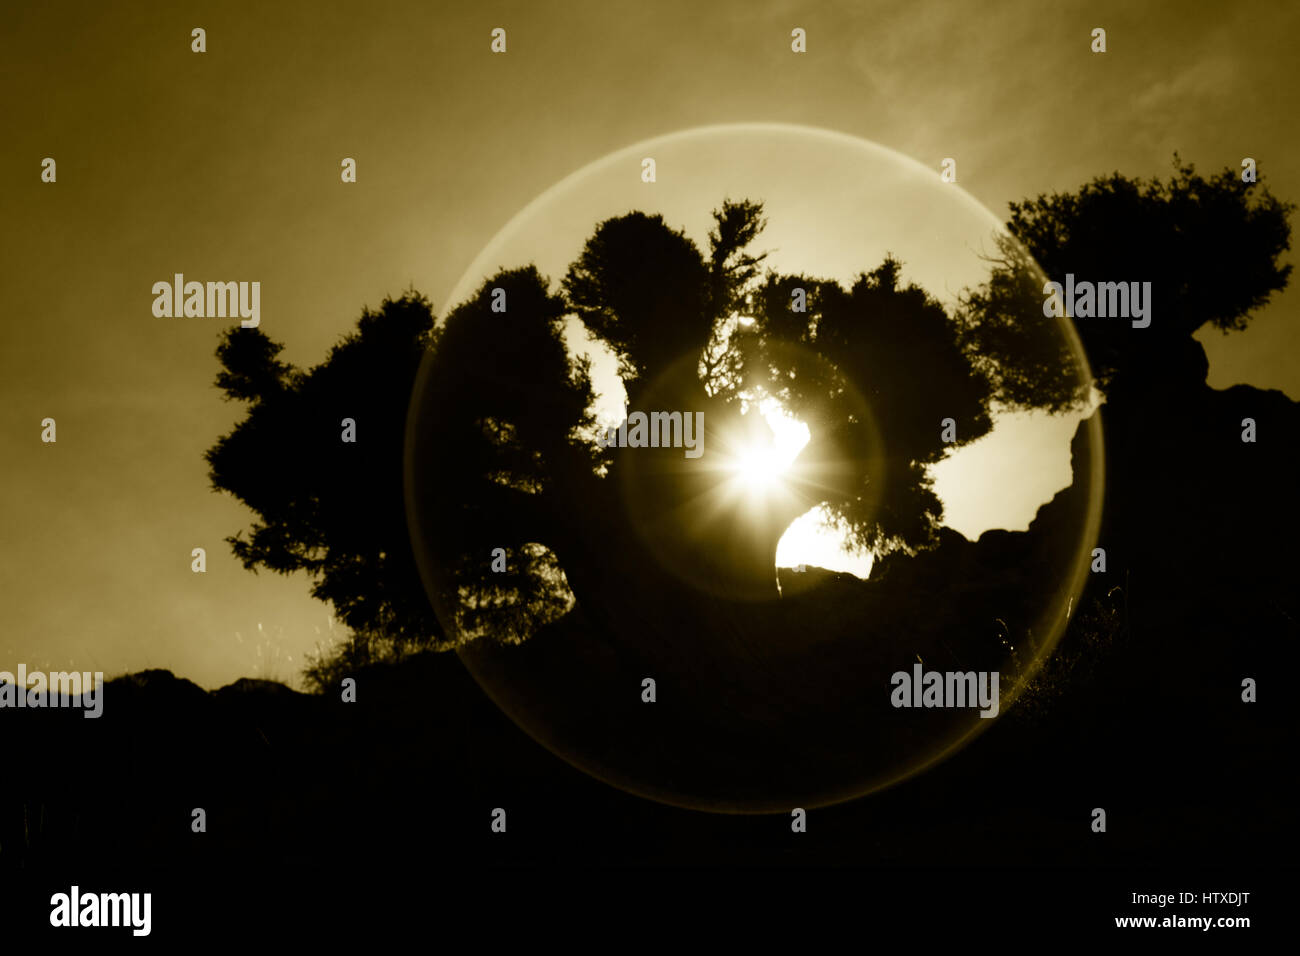 Sunset or sunrise through silhouette of an old tree in the desert. Backlit with halo effect. Stock Photo